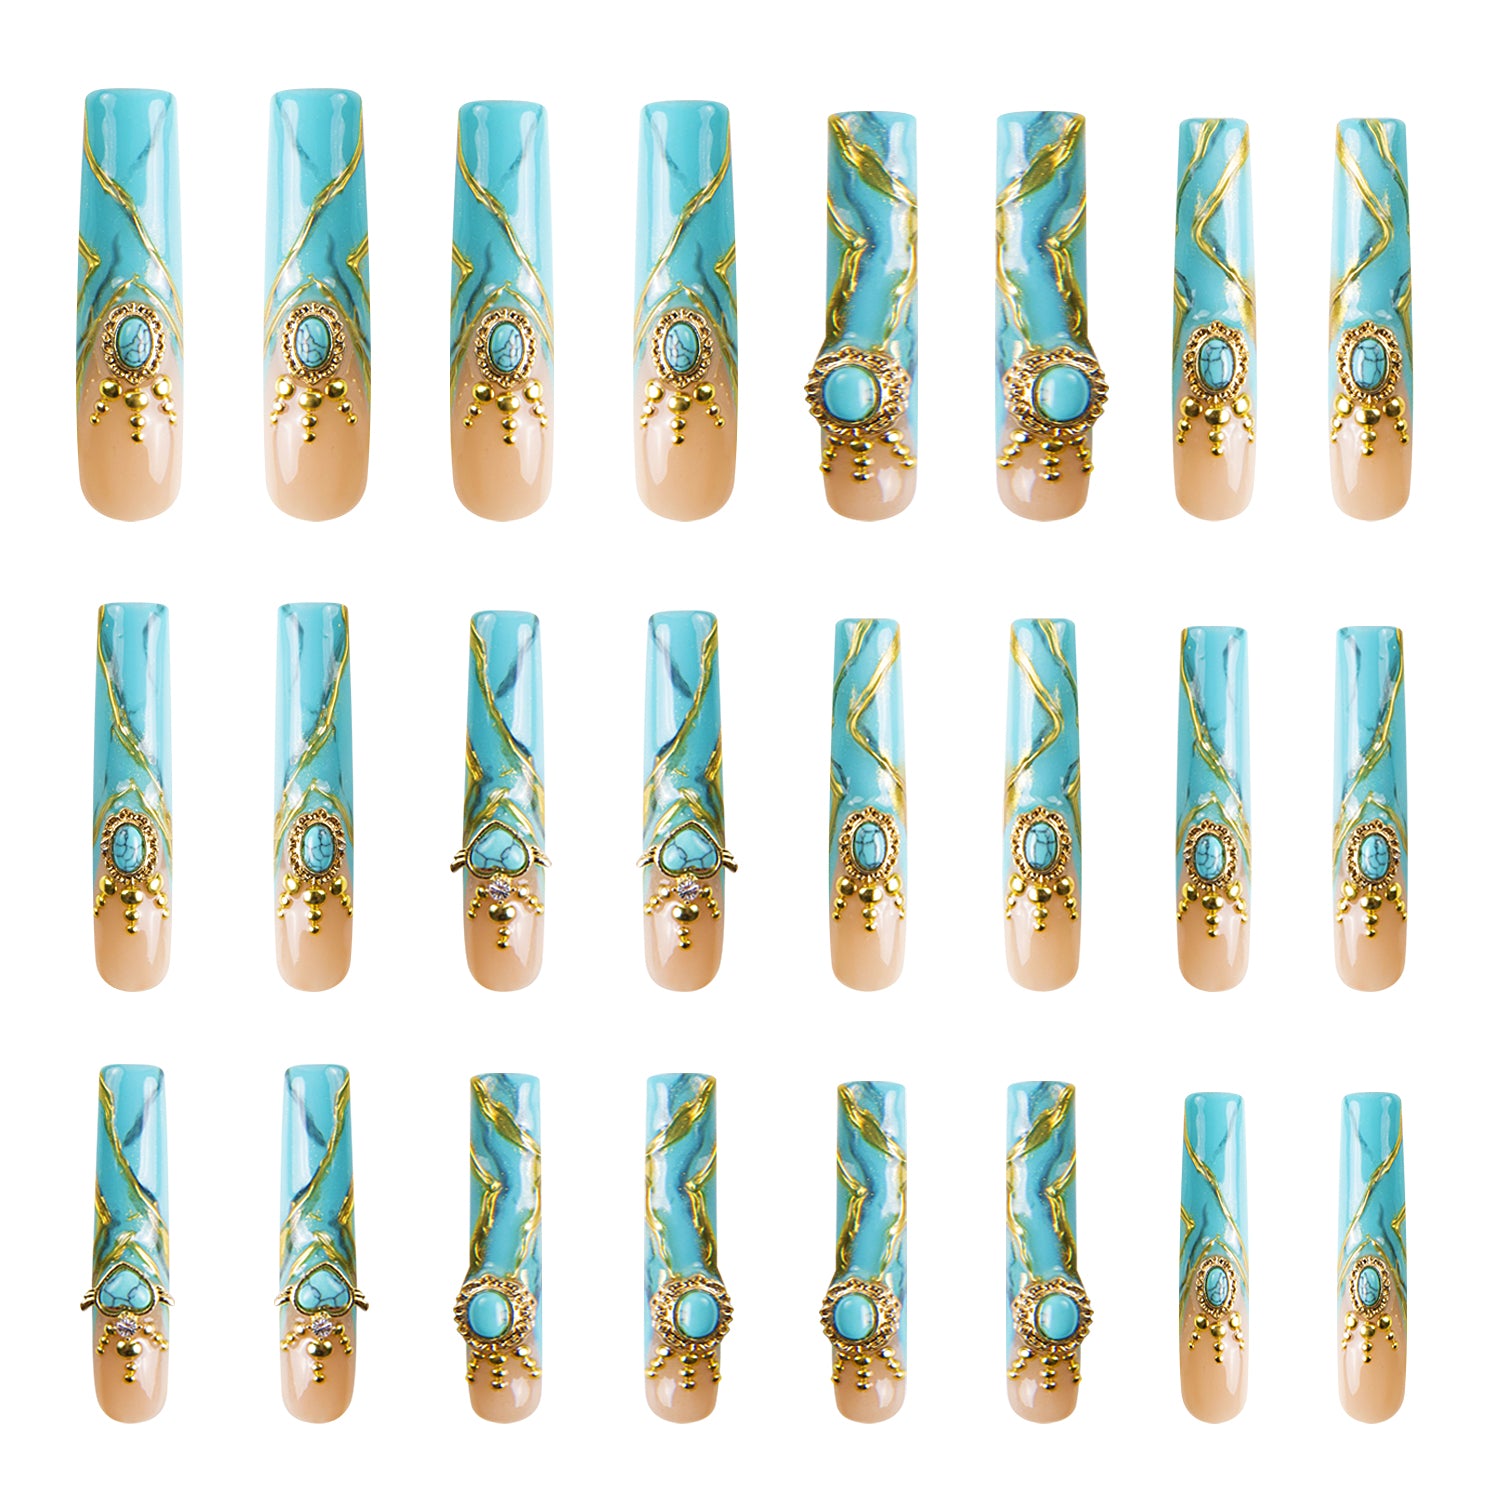 Set of 24 luxurious turquoise and gold press-on nails with intricate golden decor and sparkling gems, perfect for glamorous events and lavish parties.